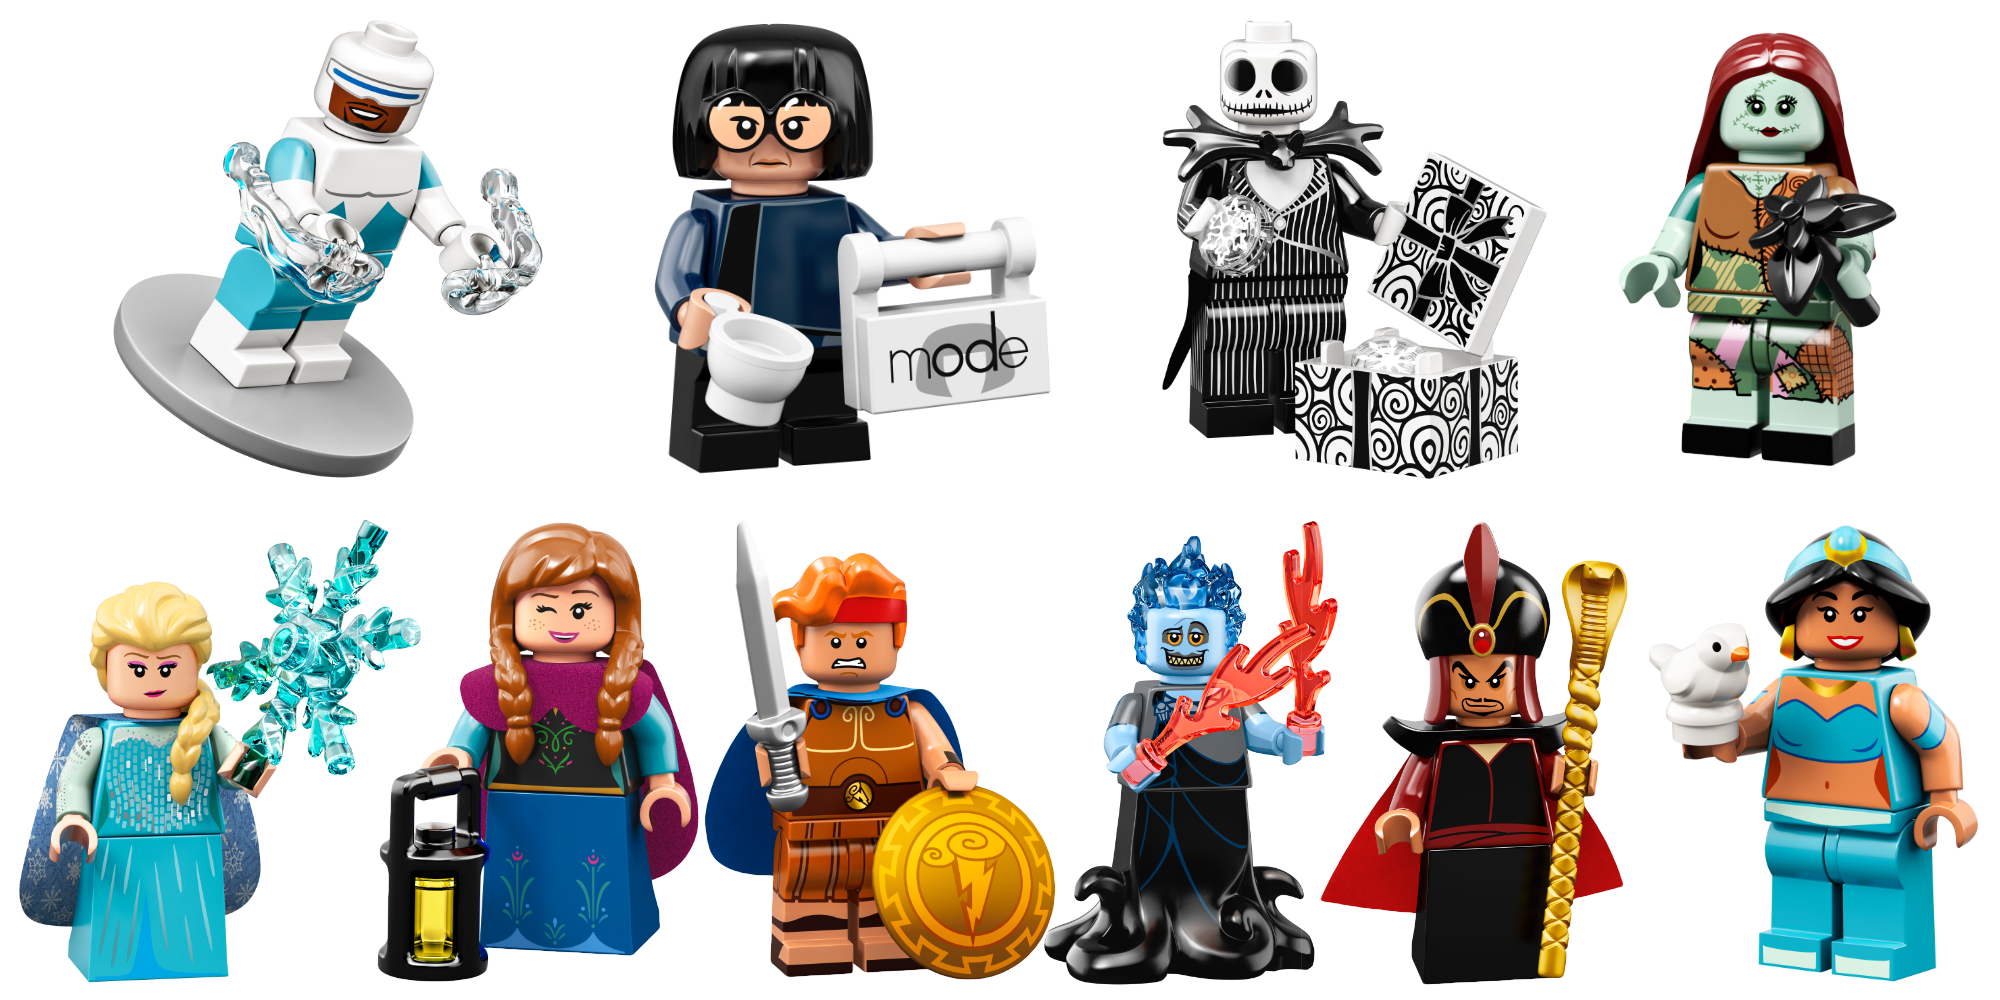 LEGO Collectible Disney Minifigures debuts 18 new characters 9to5Toys